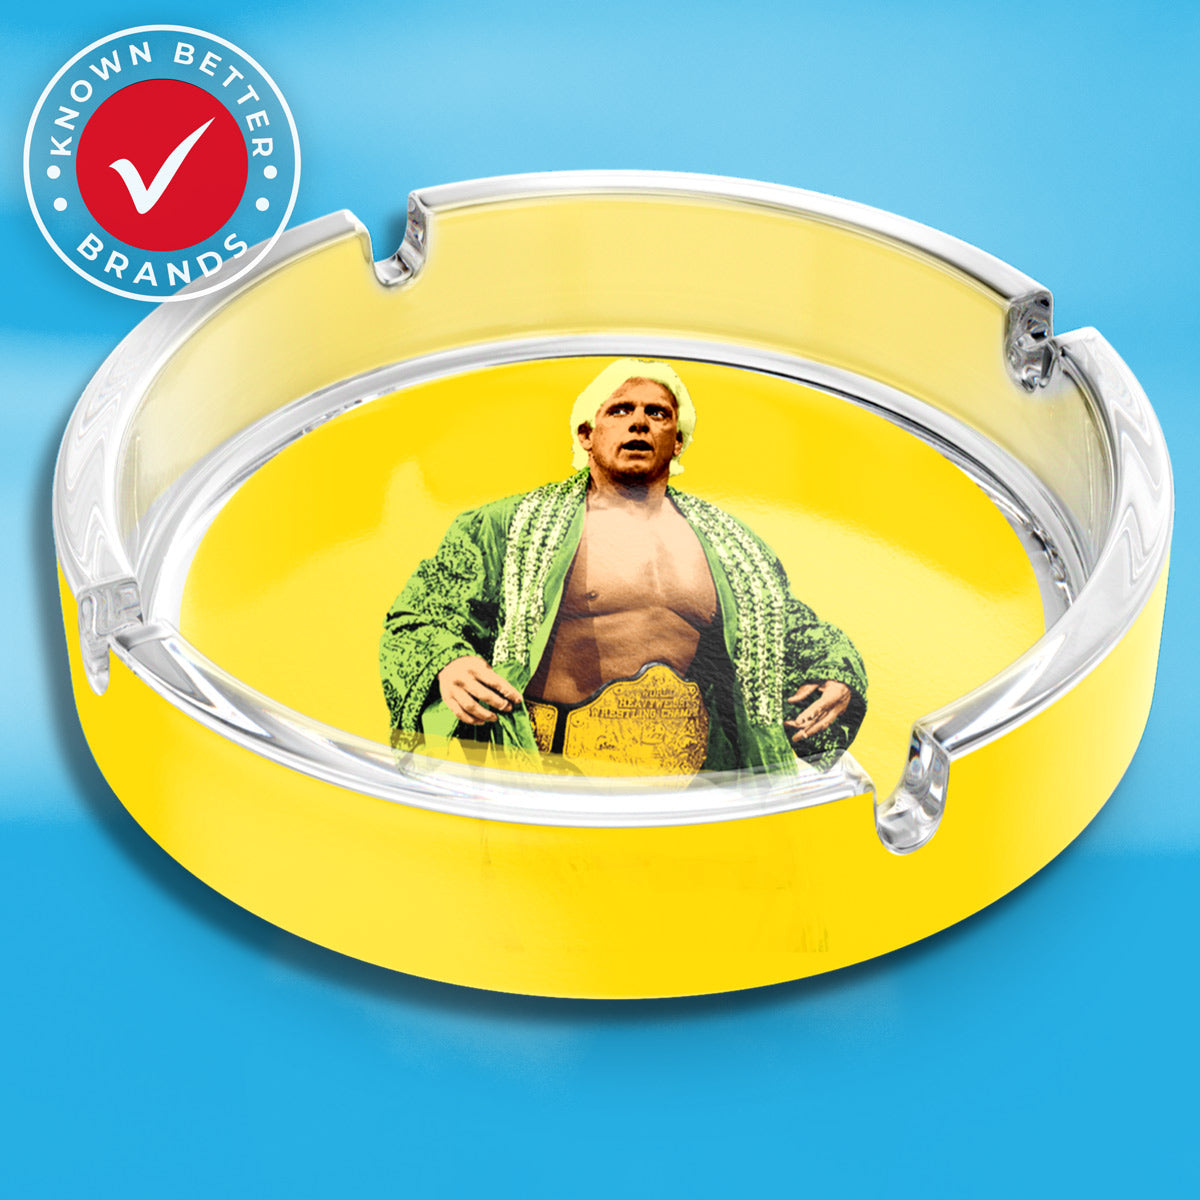 Ric Flair Drip Champ Ash Tray by Known Better Brands - Stylish and Vibrant Yellow Smoking Accessory featuring the World Champion Himself - Perfect 4" Diameter with 4 Corner Holes for Your Smoking Pleasure - Official RFD Licensee - Elevate Your Lifestyle with Flair